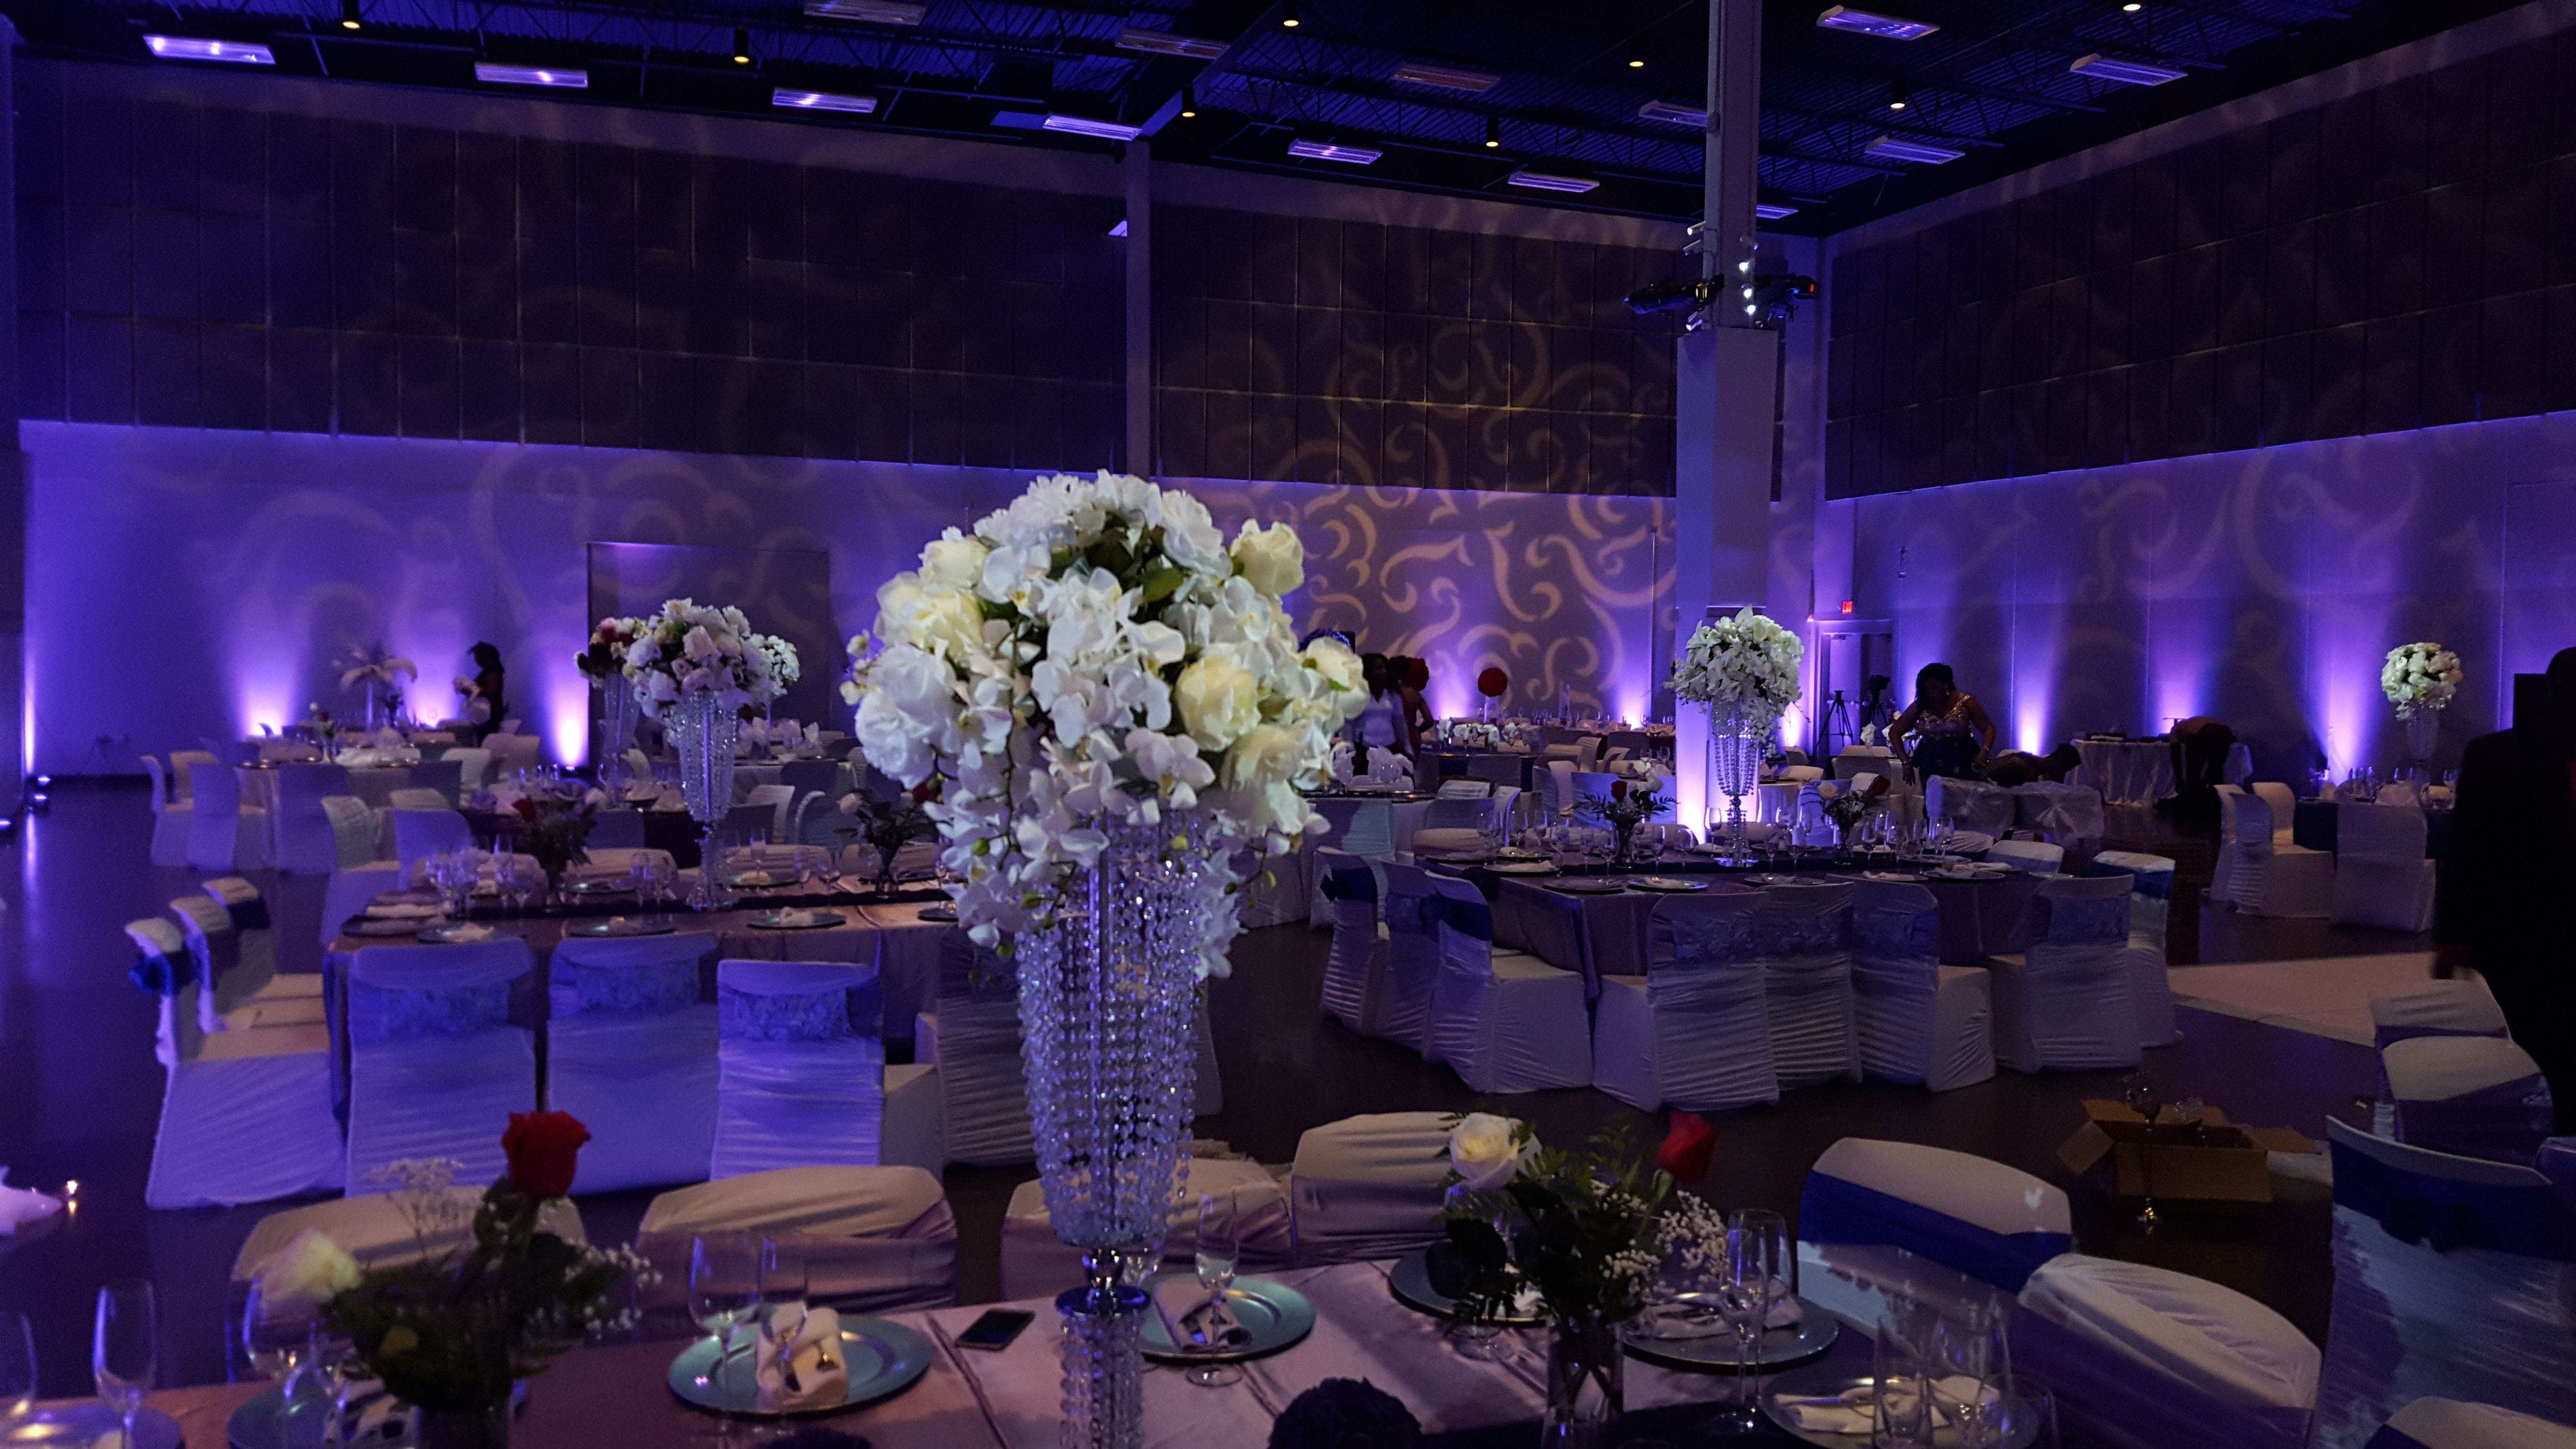 Wedding lighting at the Passion Event Center. Up lighting in lavender purple. Pin spots on flowers. Gobo pattern on the walls.